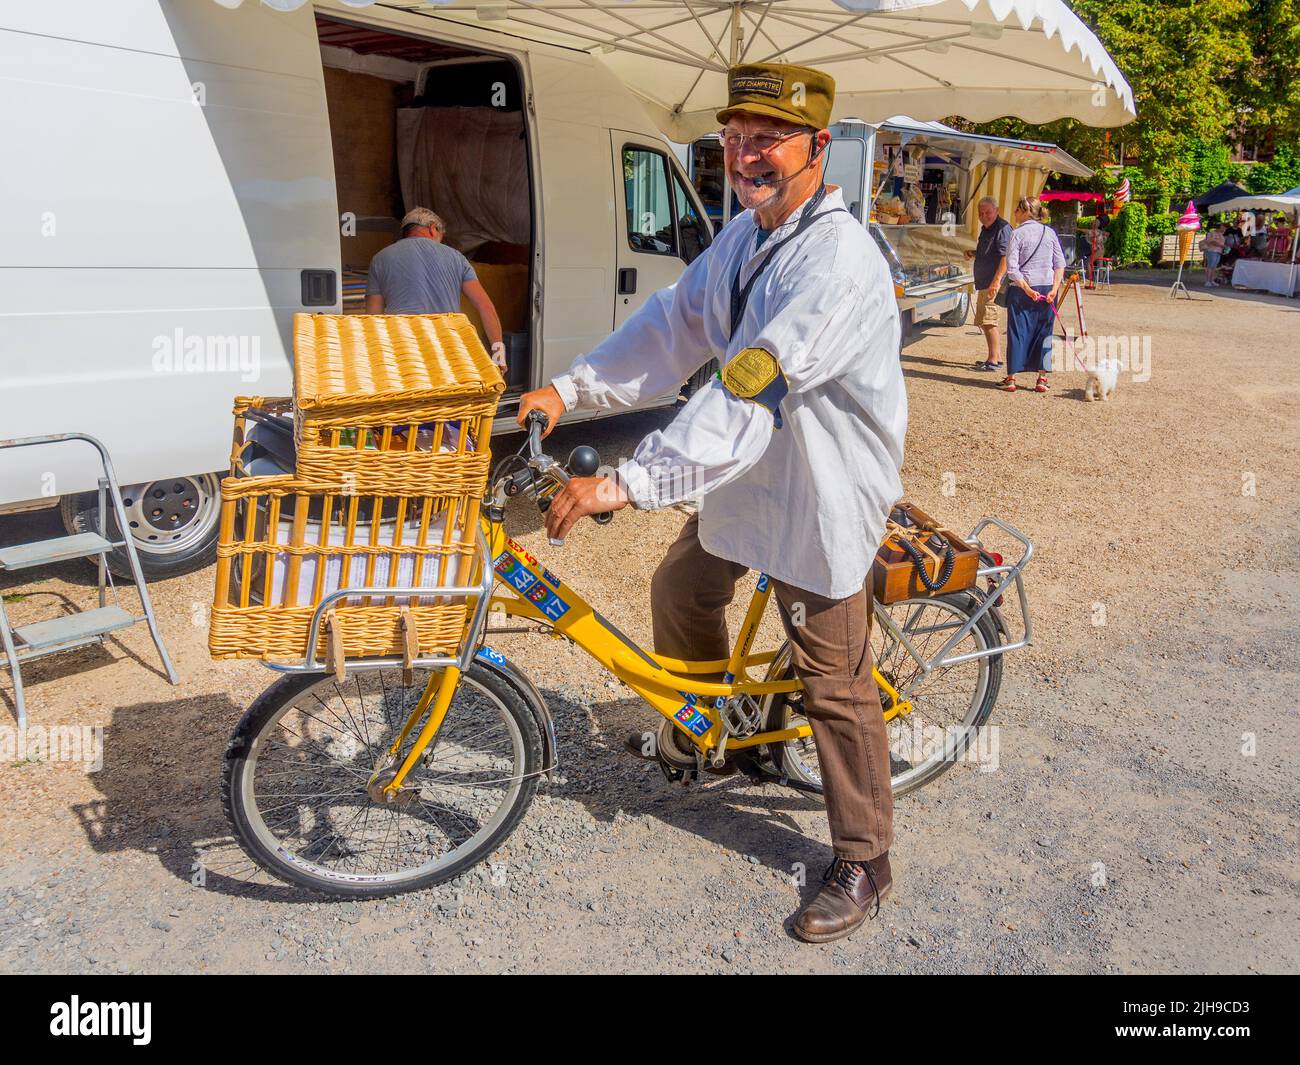 Street fair information organiser on bicycle - Angles-sur-l'Anglin, Vienne (86), France. Stock Photo